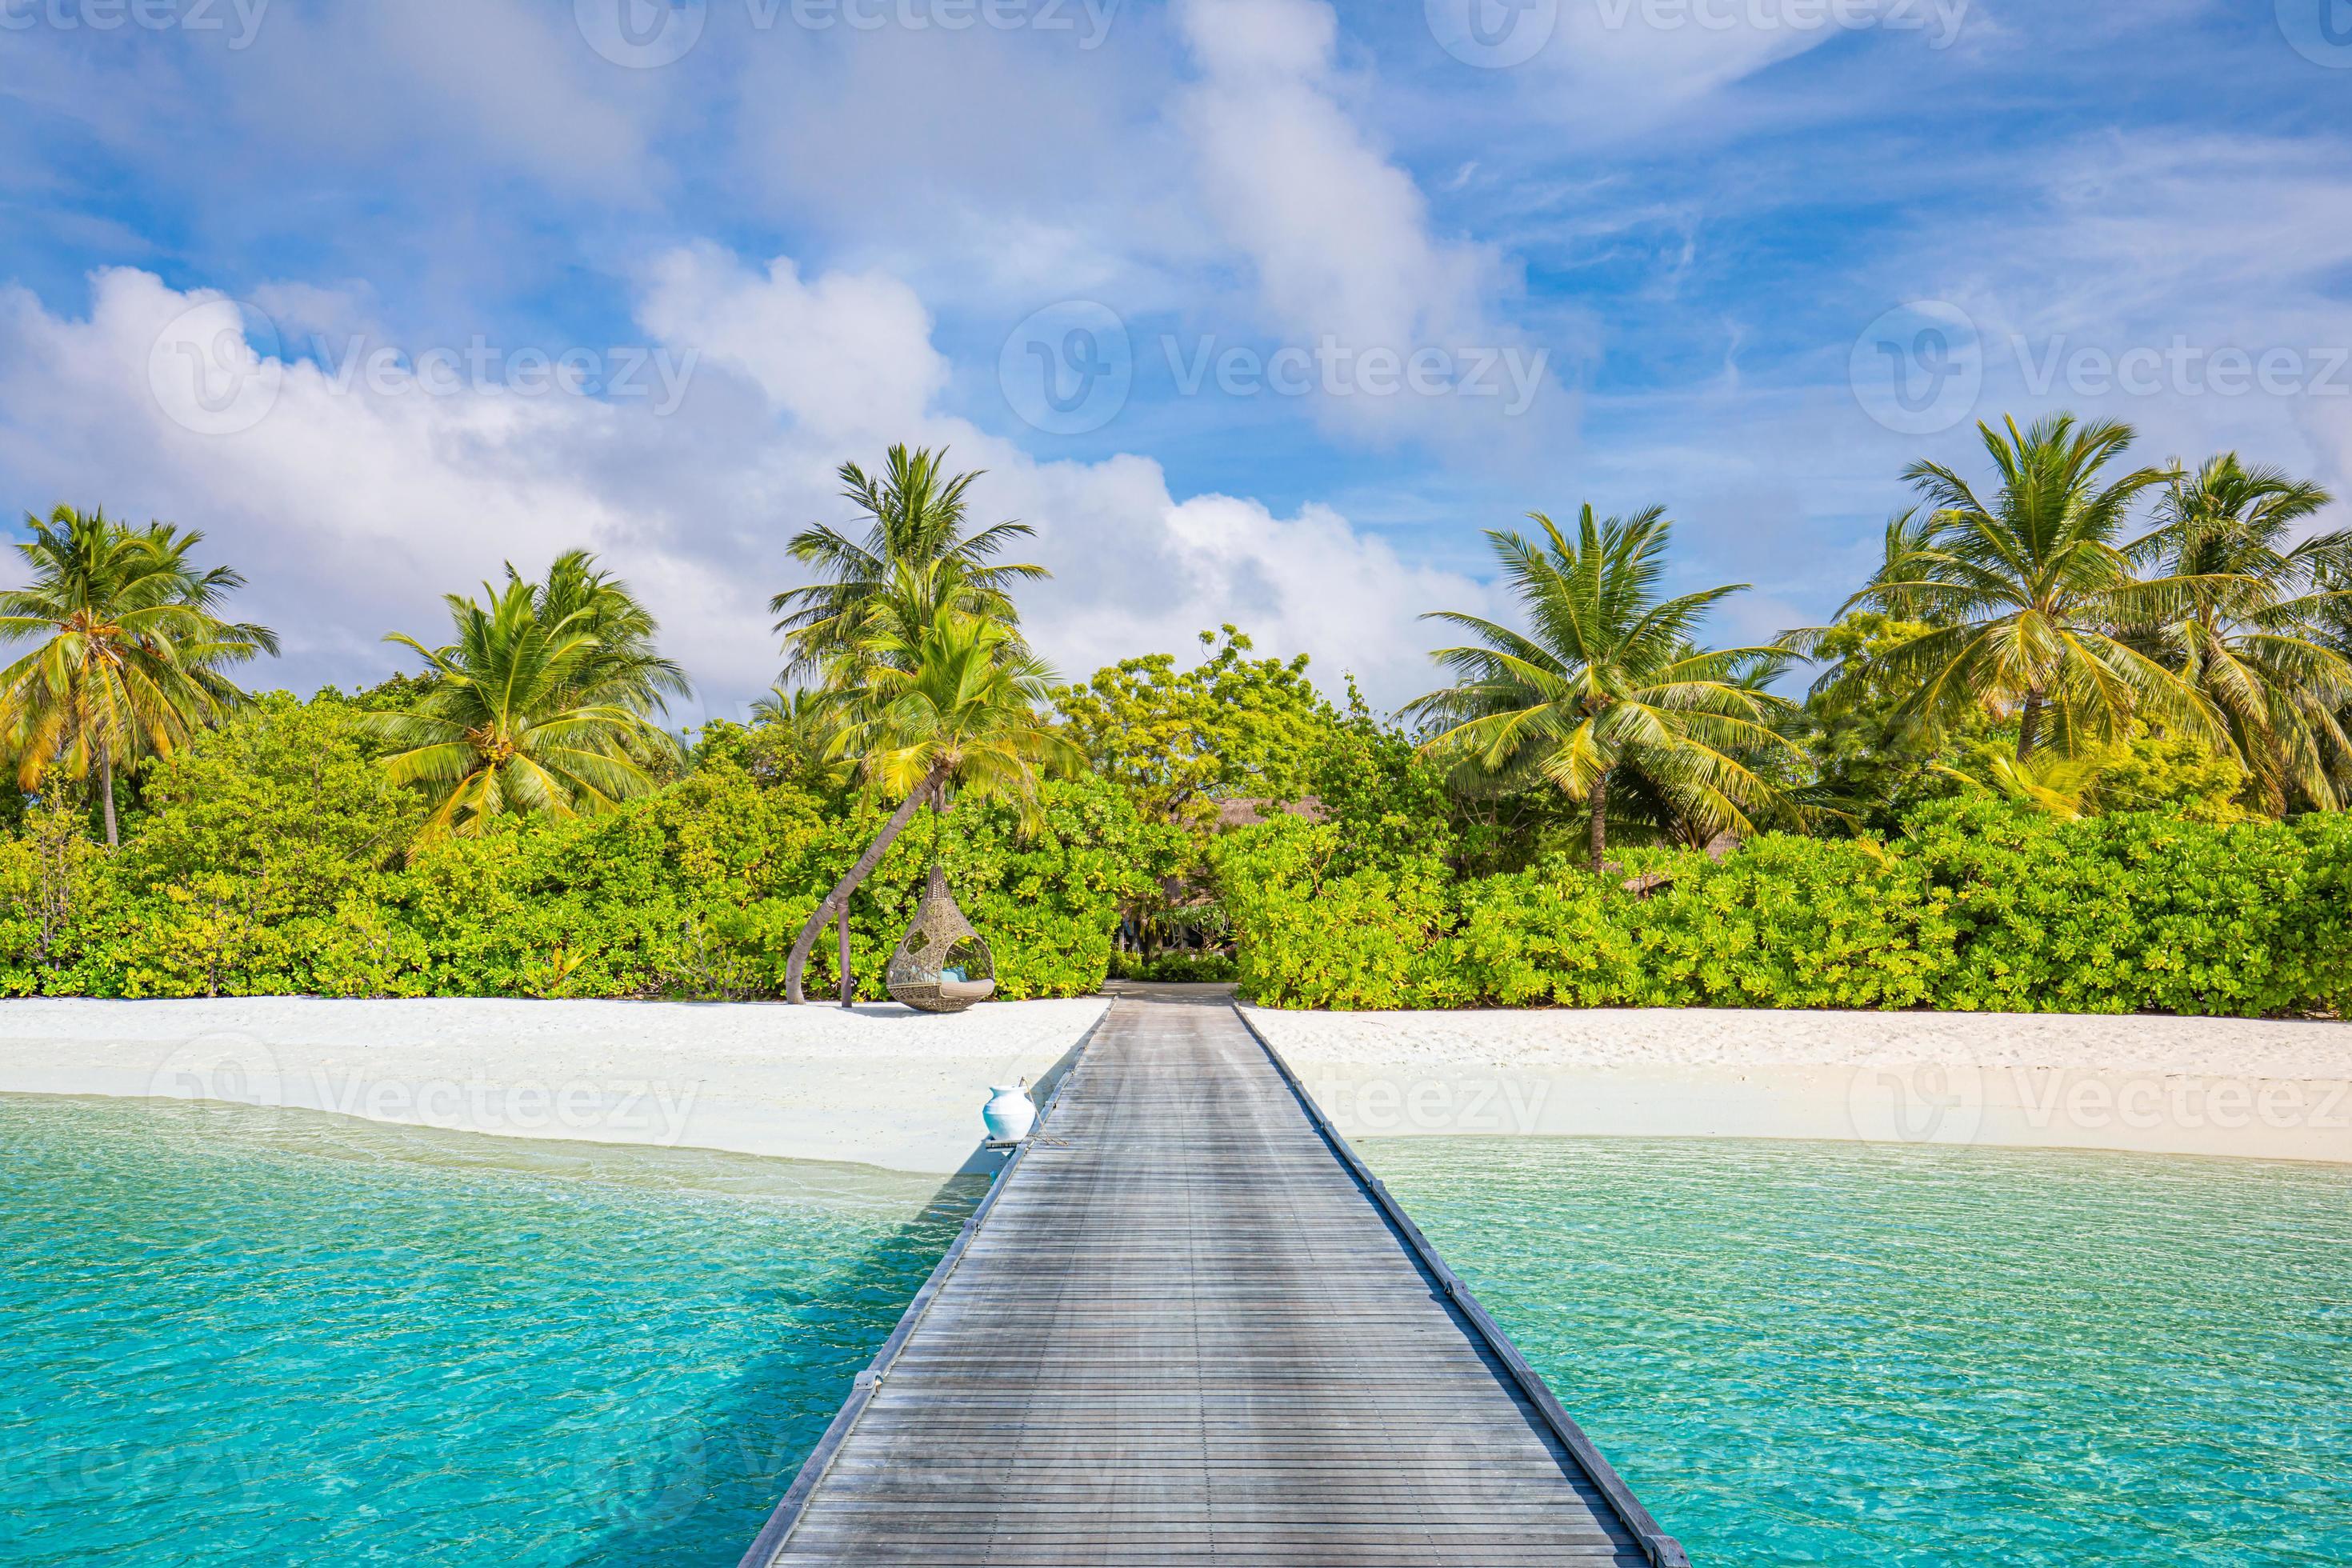 Idyllic Tropical Beach Landscape For Background Or Wallpaper Design Of